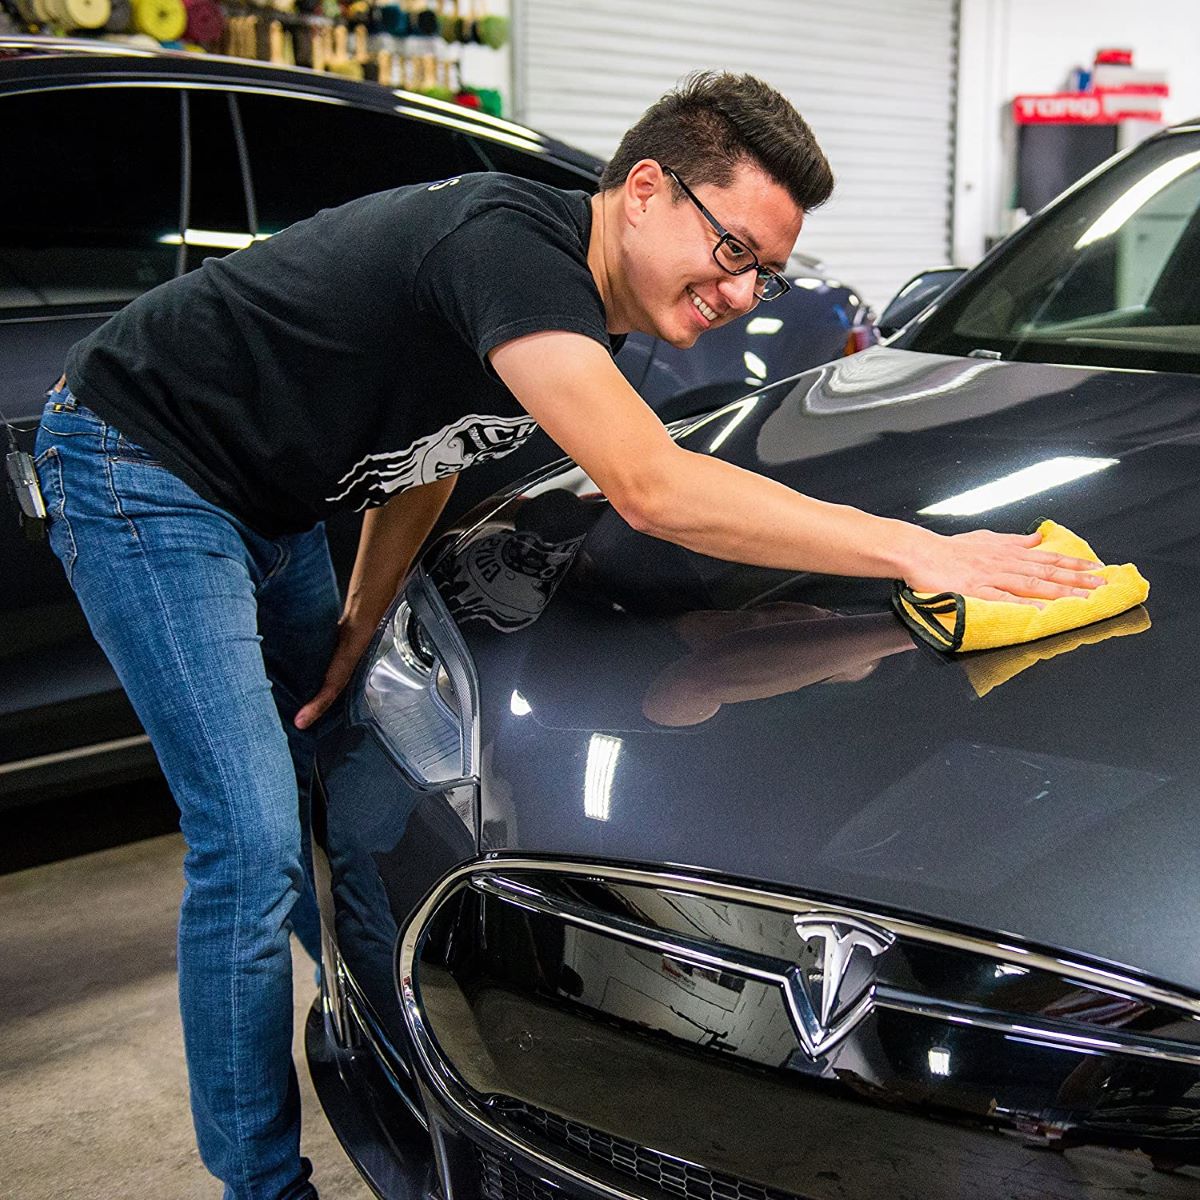 A man wearing jeans, a black t-shirt, and glasses leans over a car with one of the best auto detailing accessories: the simple microfiber towel